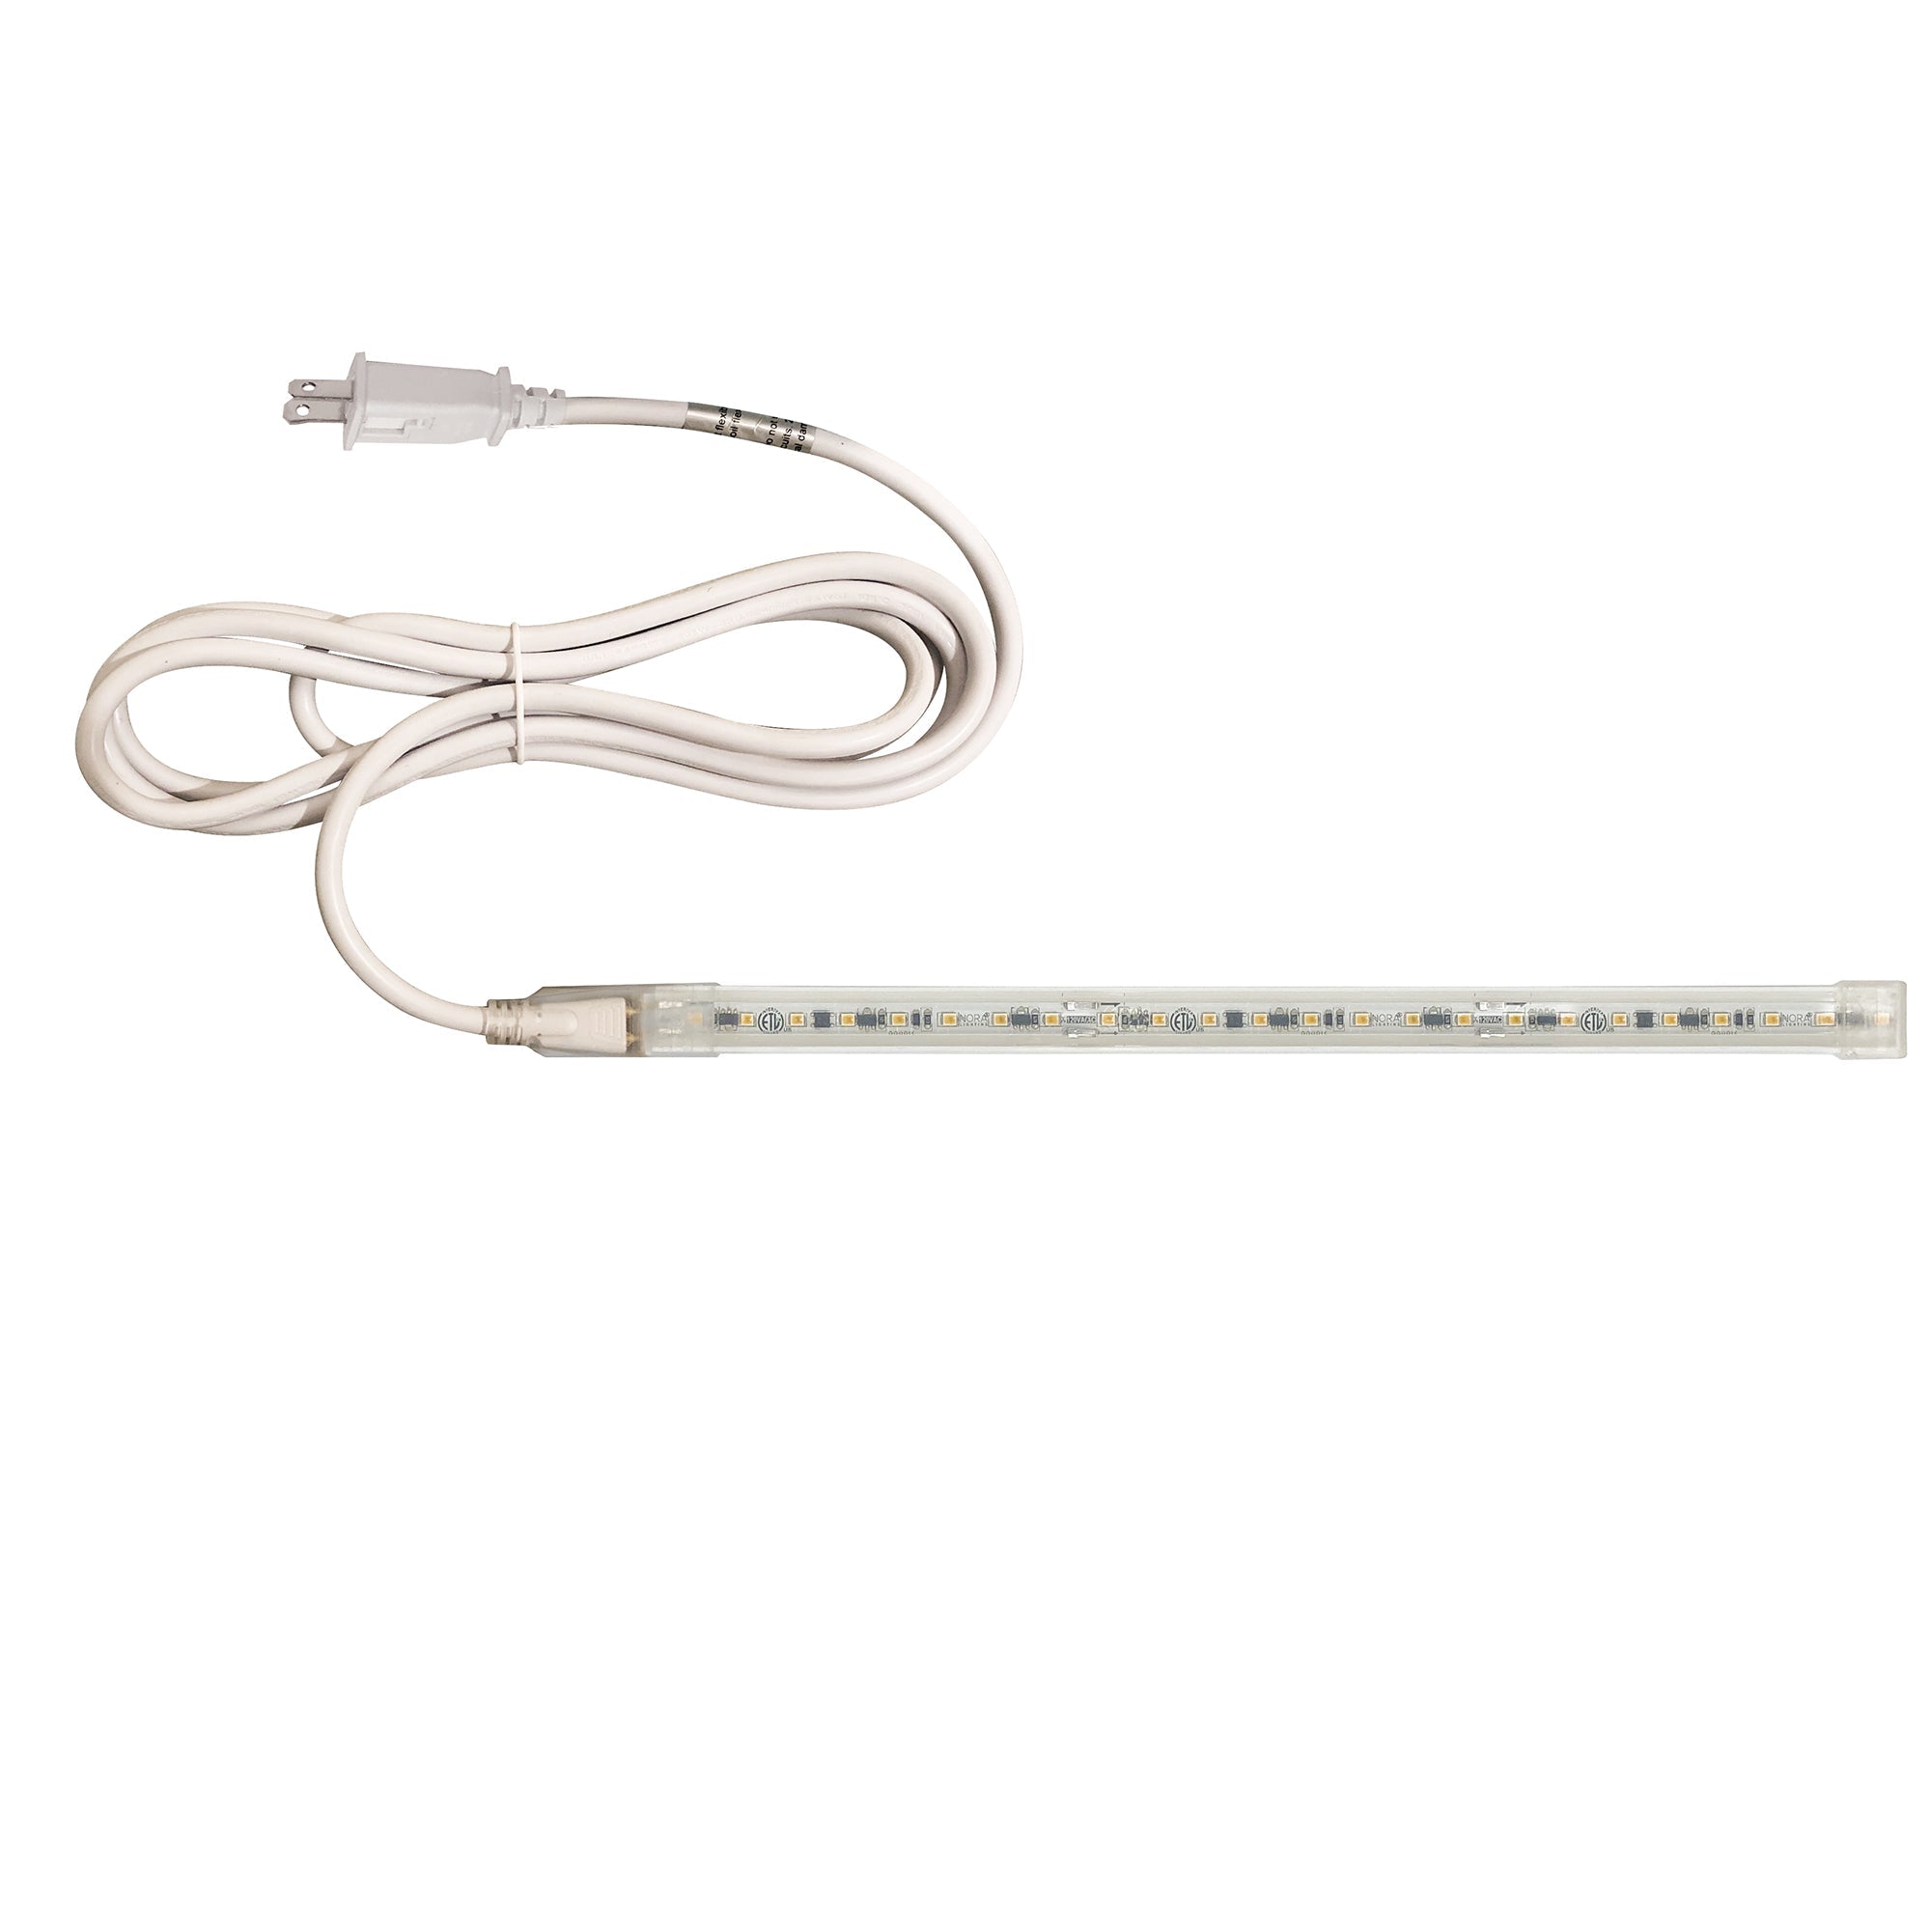 Nora Lighting NUTP13-W53-12-930/CP - Accent / Undercabinet - Custom Cut 53-ft 120V Continuous LED Tape Light, 330lm / 3.6W per foot, 3000K, w/ Mounting Clips and 8' Cord & Plug